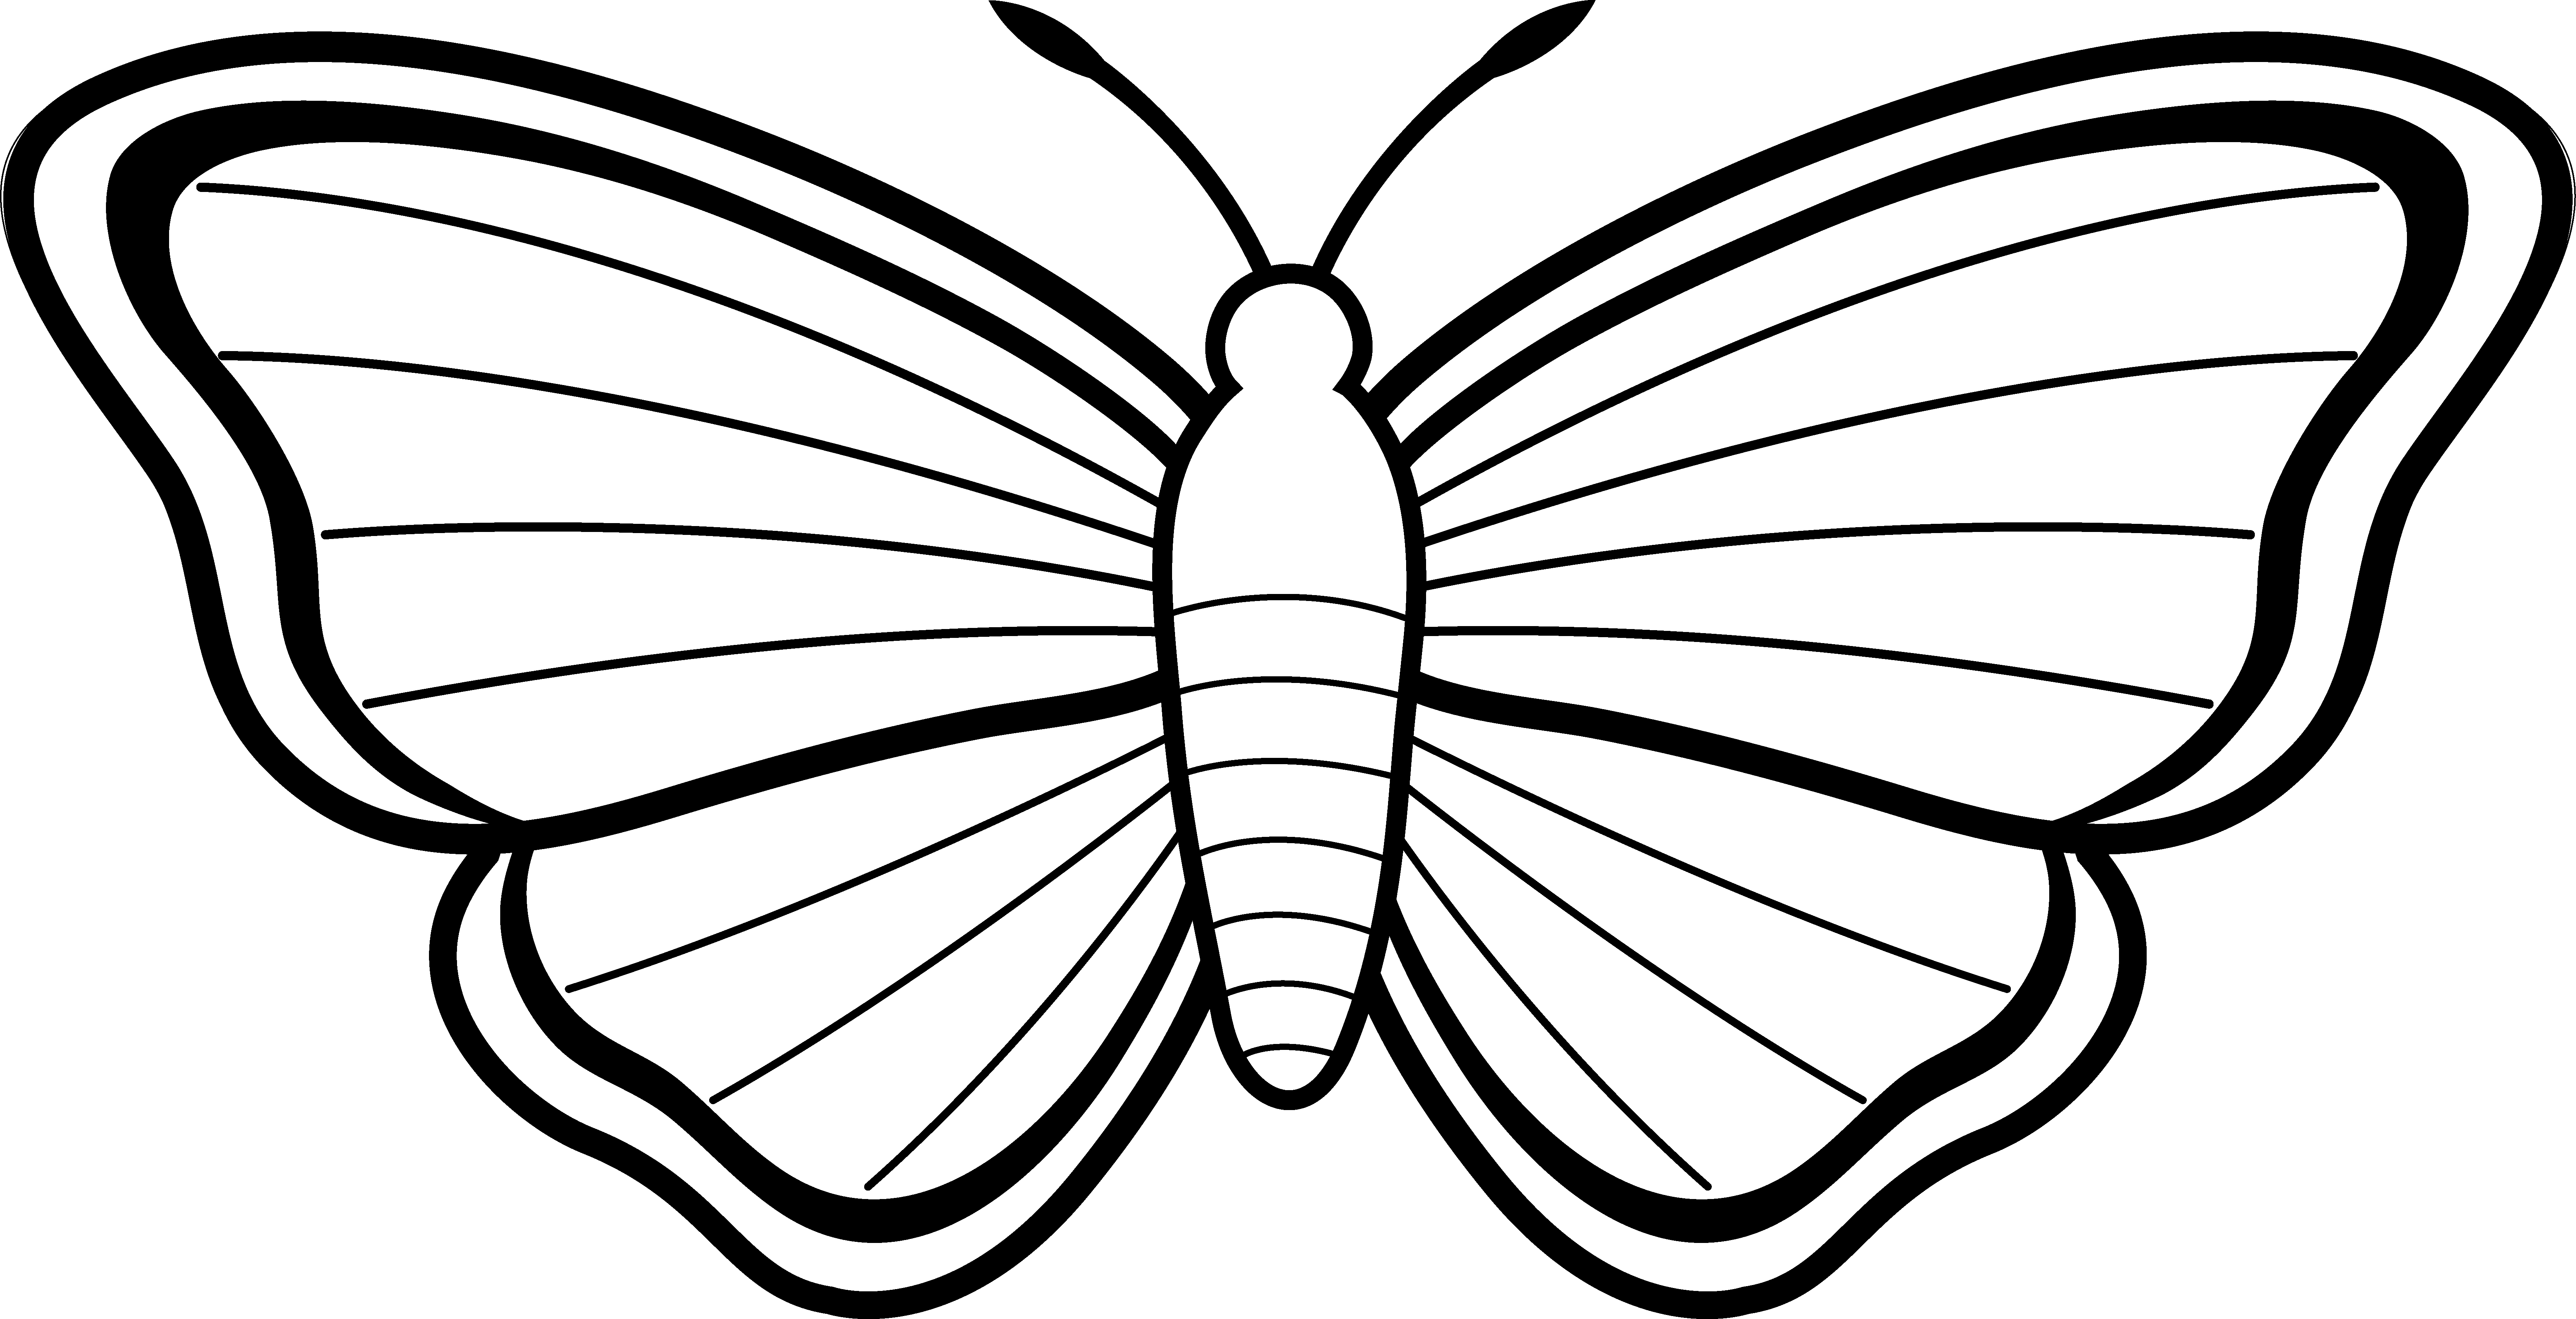 Butterfly Outline Clipart - Cliparts.co